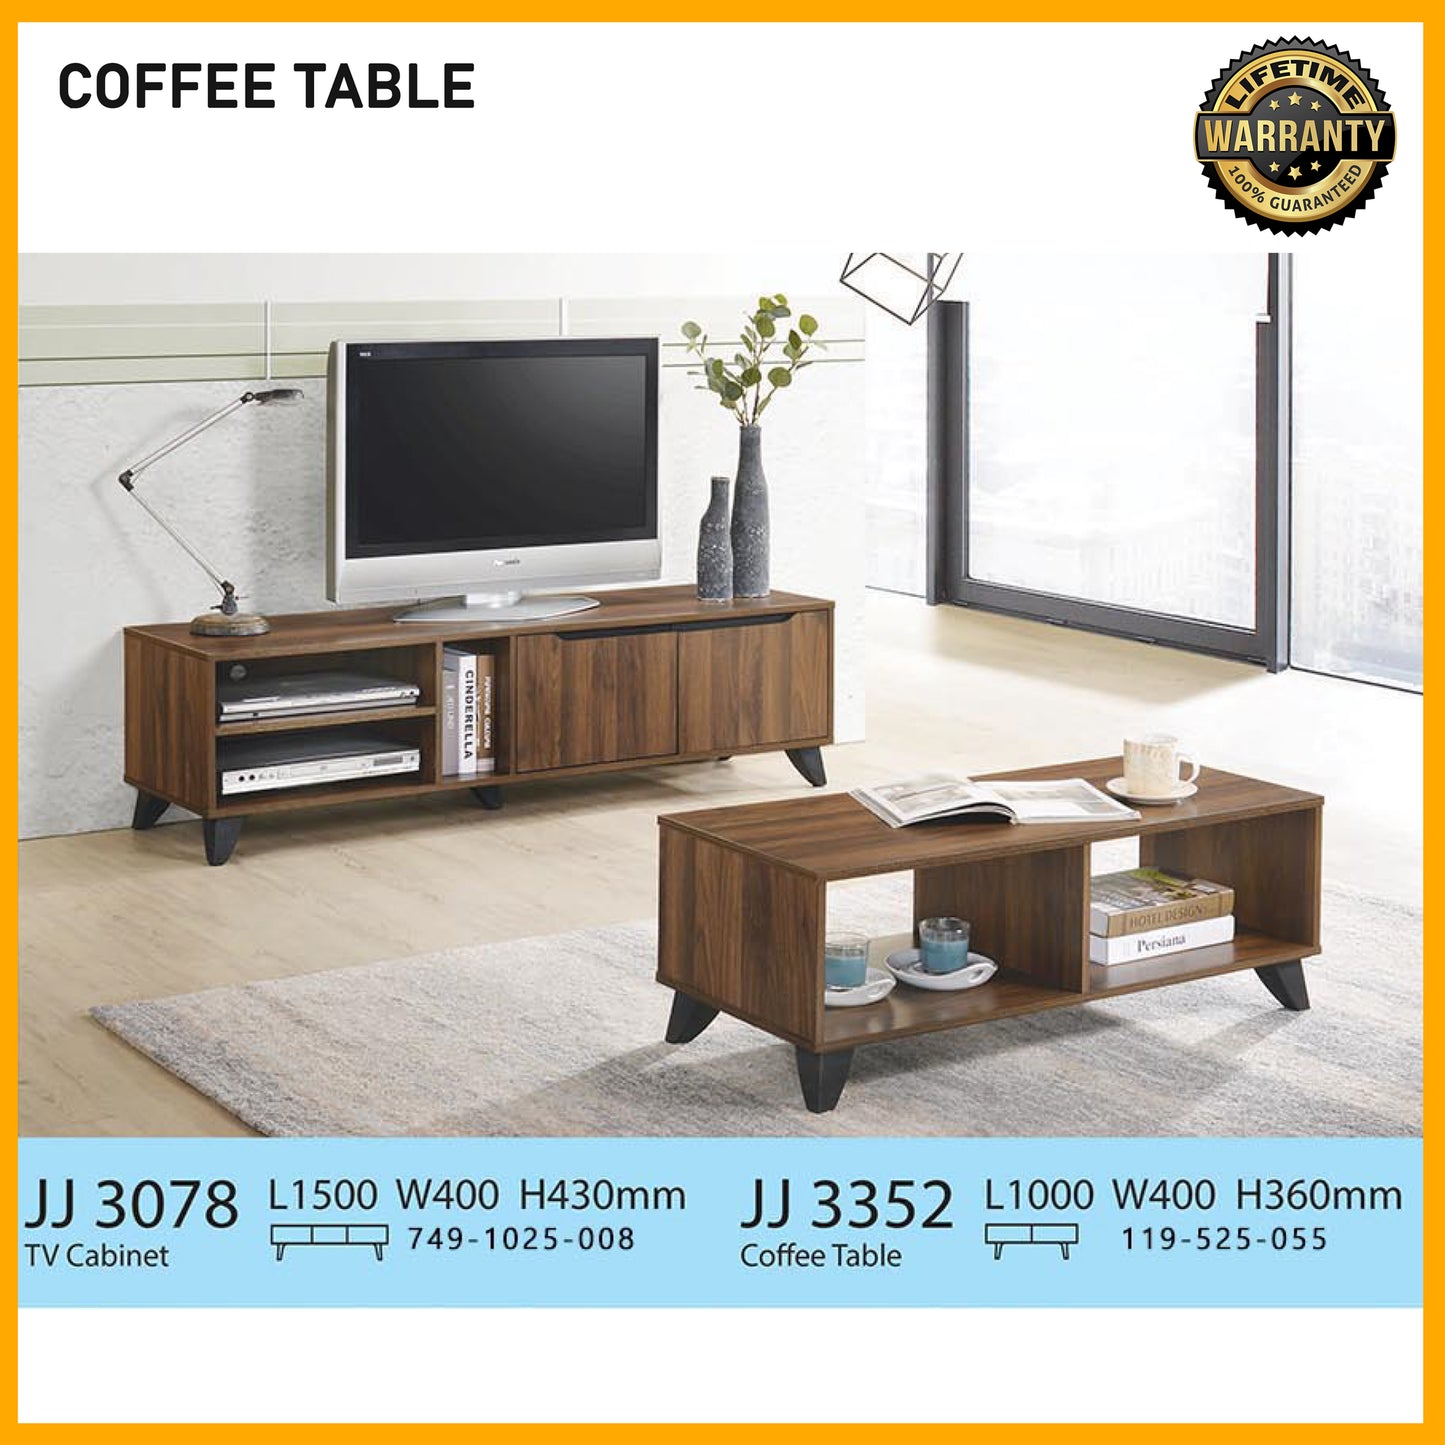 SMARTBED | Coffee Table -JJ3352